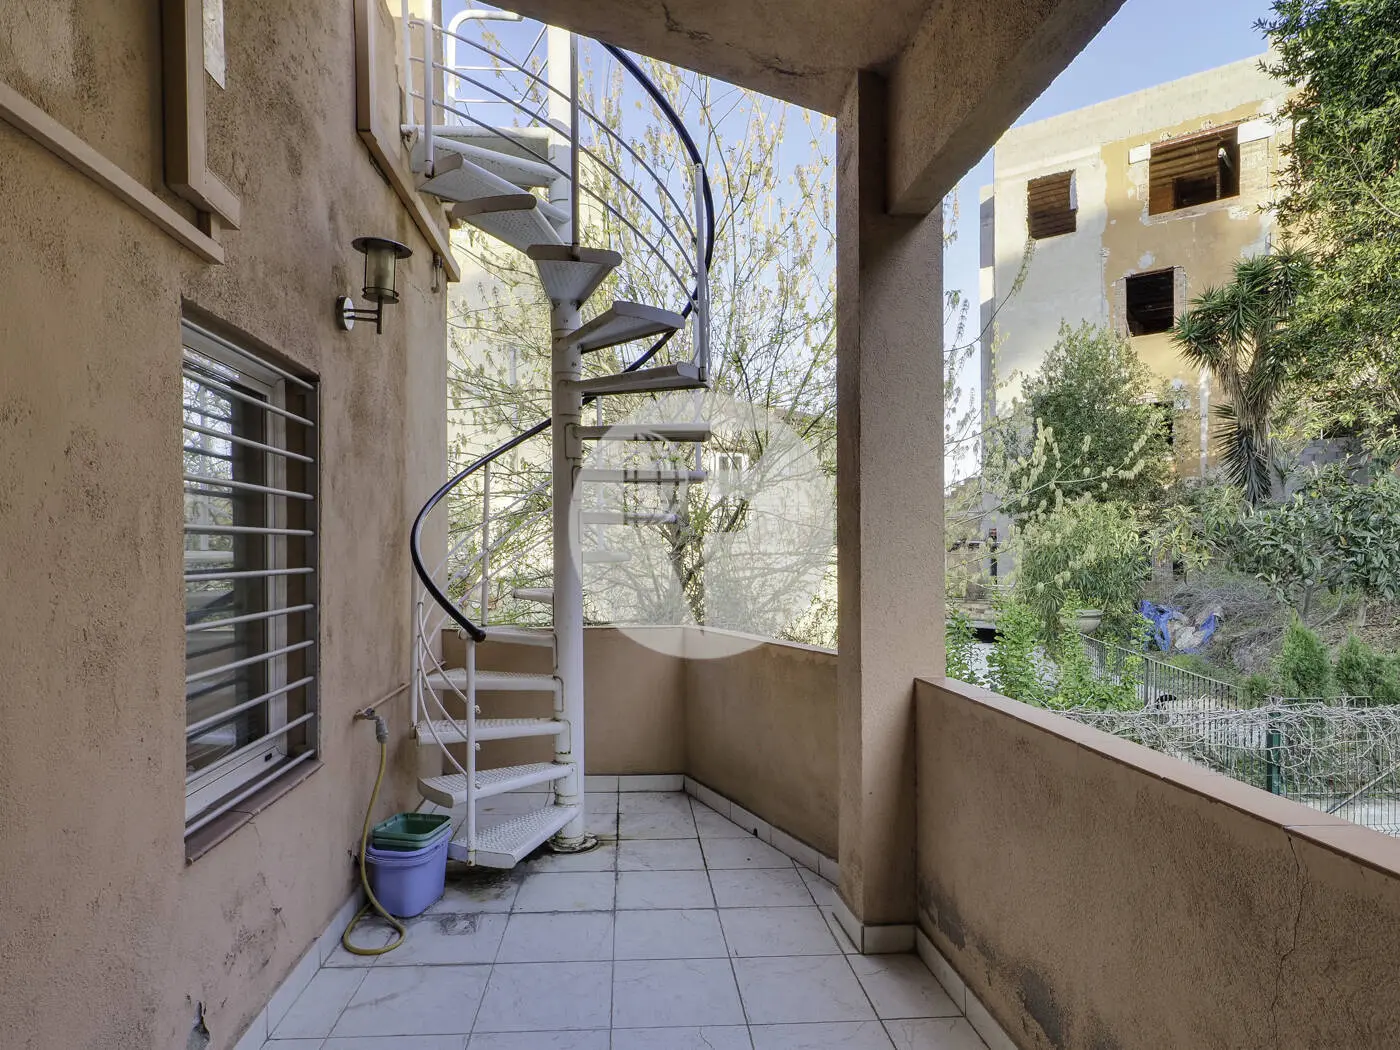 Fantastic 185m² house with garden and terrace in the Sarrià neighborhood of Barcelona 45